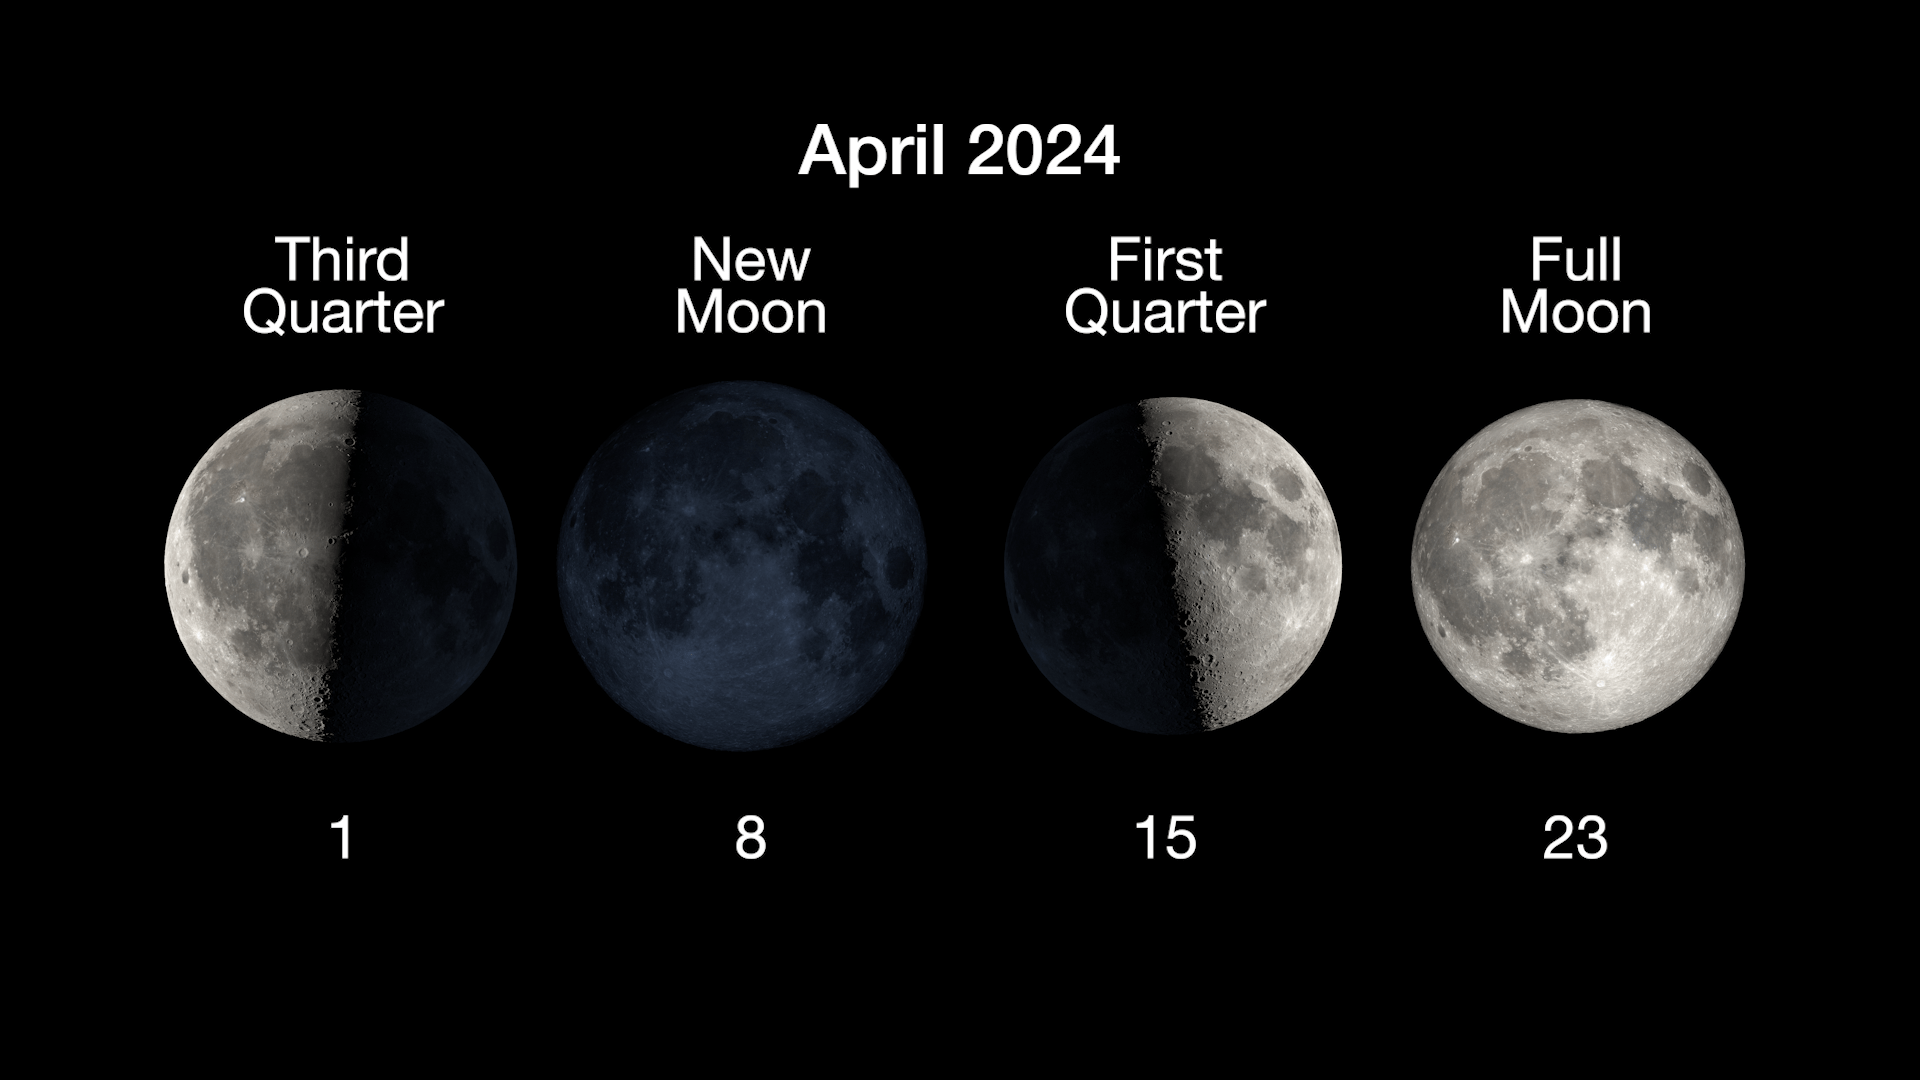 The main phases of the Moon are illustrated in a horizontal row, with the third quarter moon on April 1st, new moon on April 8th, first quarter on April 15th, and full moon on April 23rd.